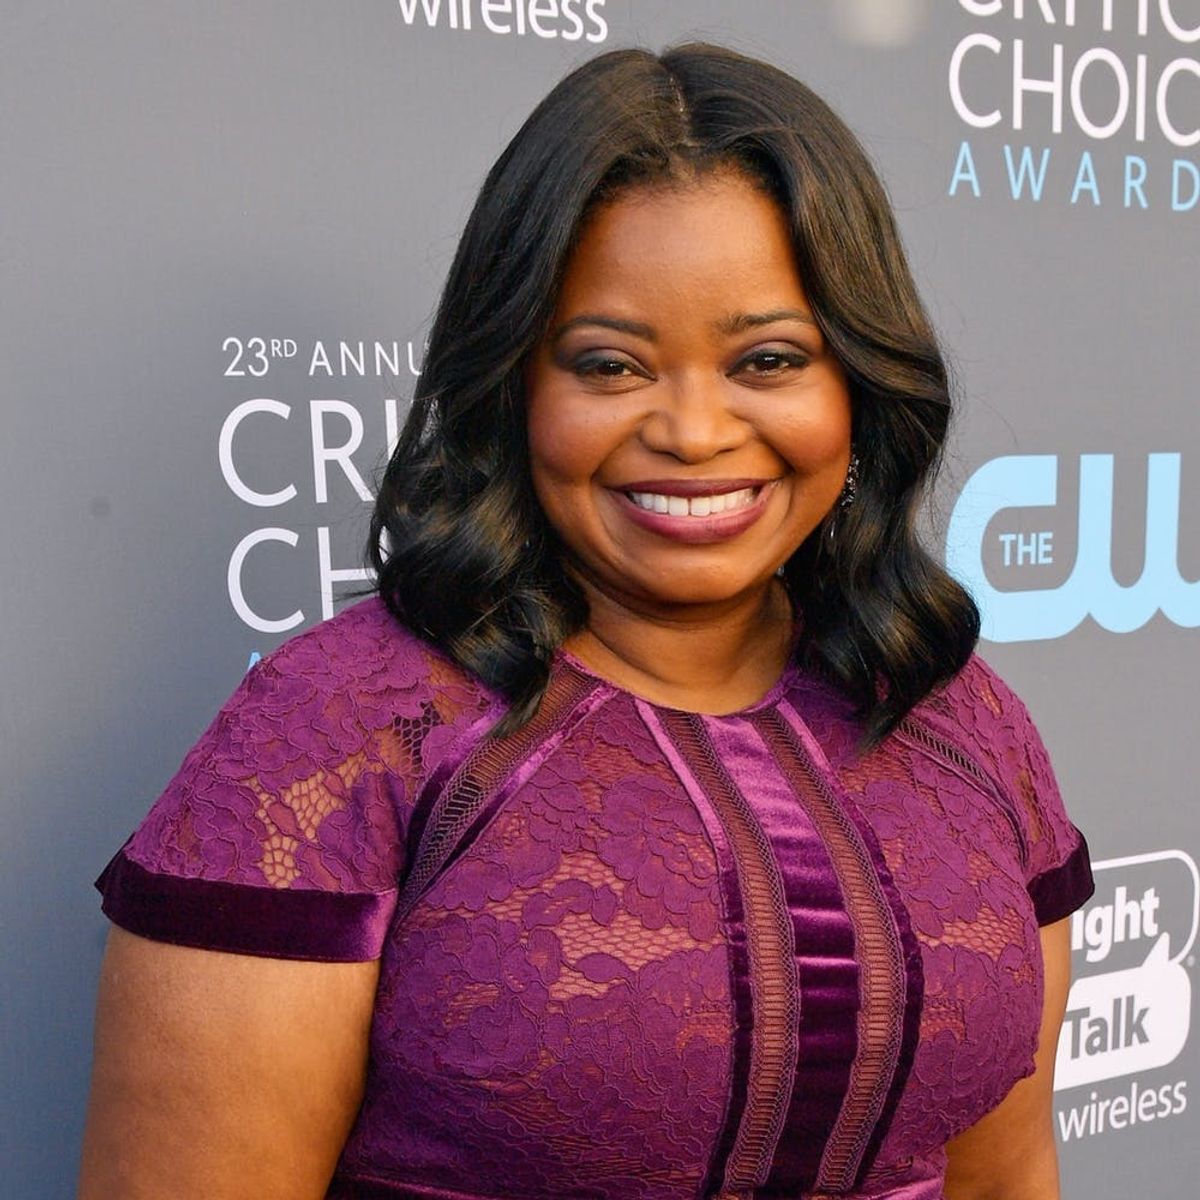 Octavia Spencer Is Buying Out a Screening of ‘Black Panther’ for Underserved Communities